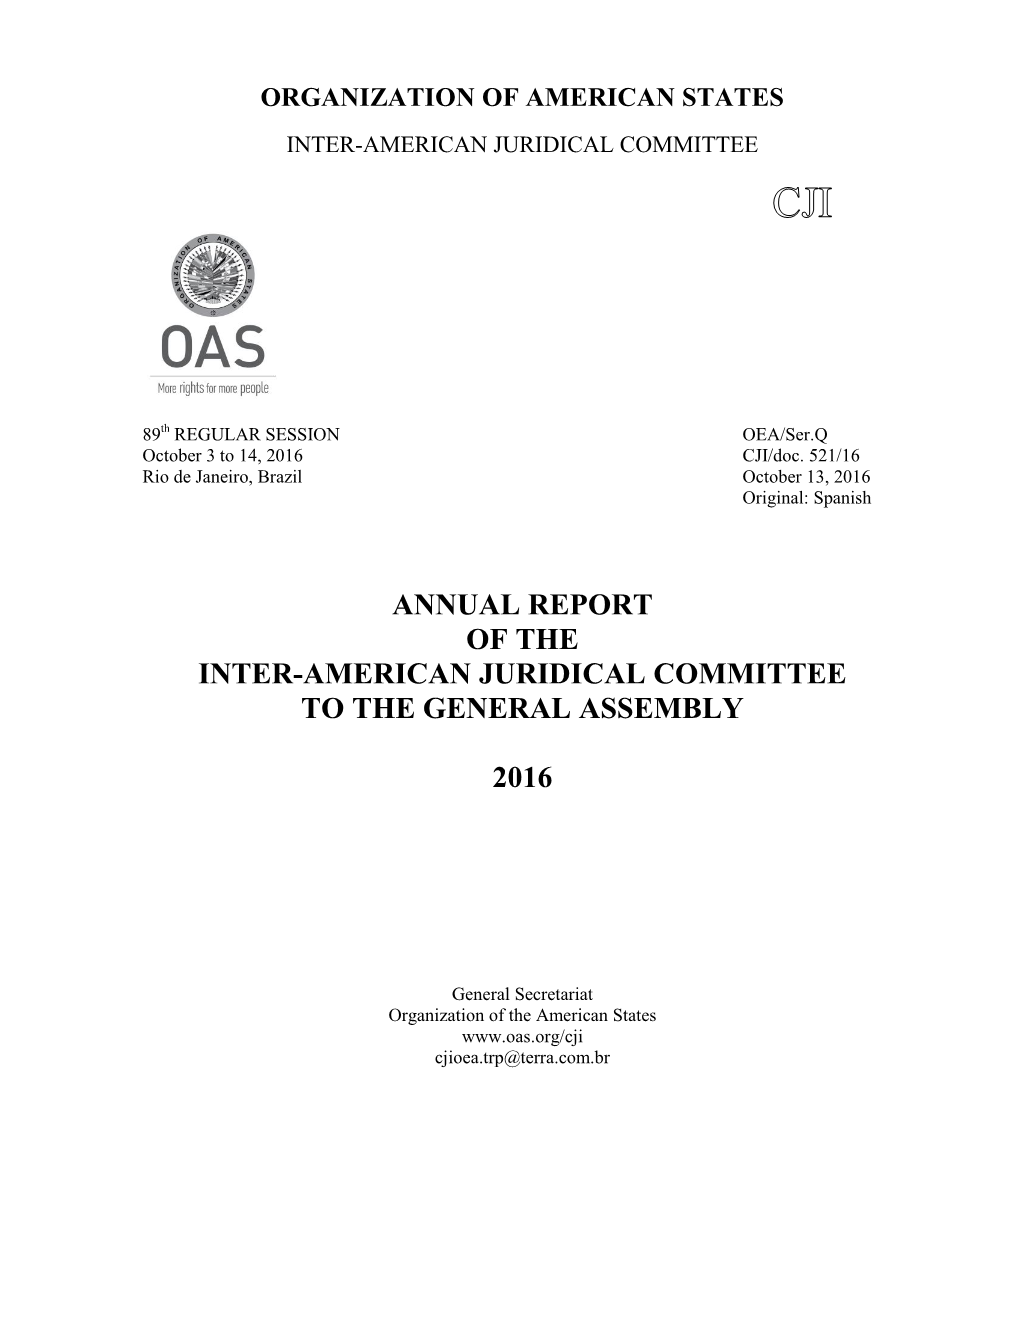 Annual Report of the Inter-American Juridical Committee to the General Assembly (2016)